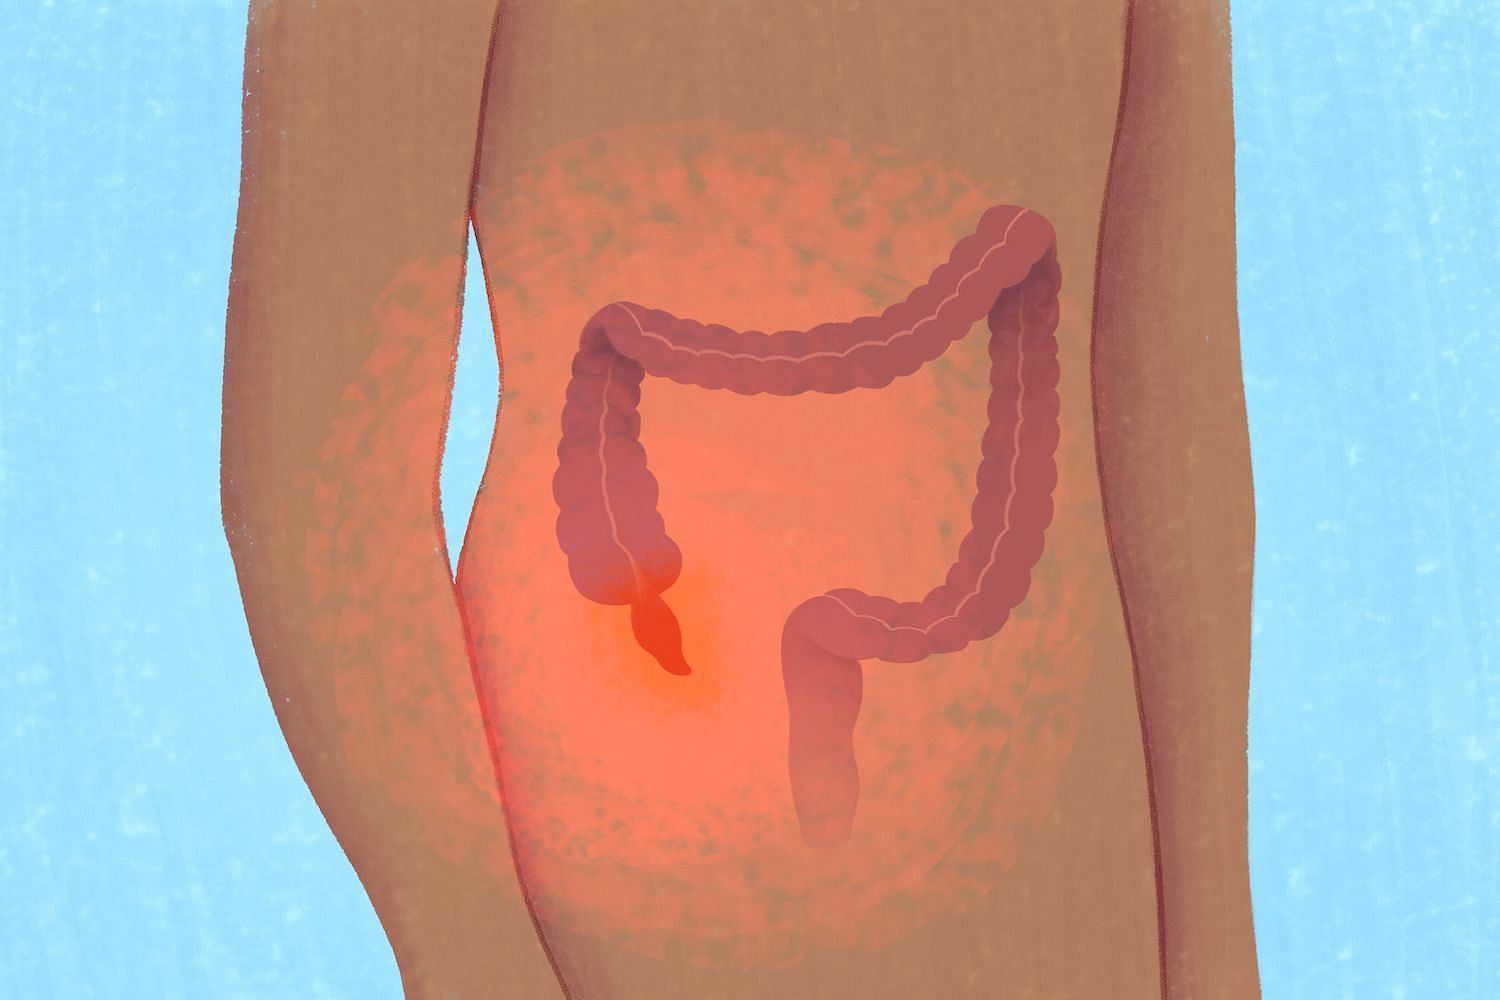 Swelling of the appendix (Image via Getty Images)